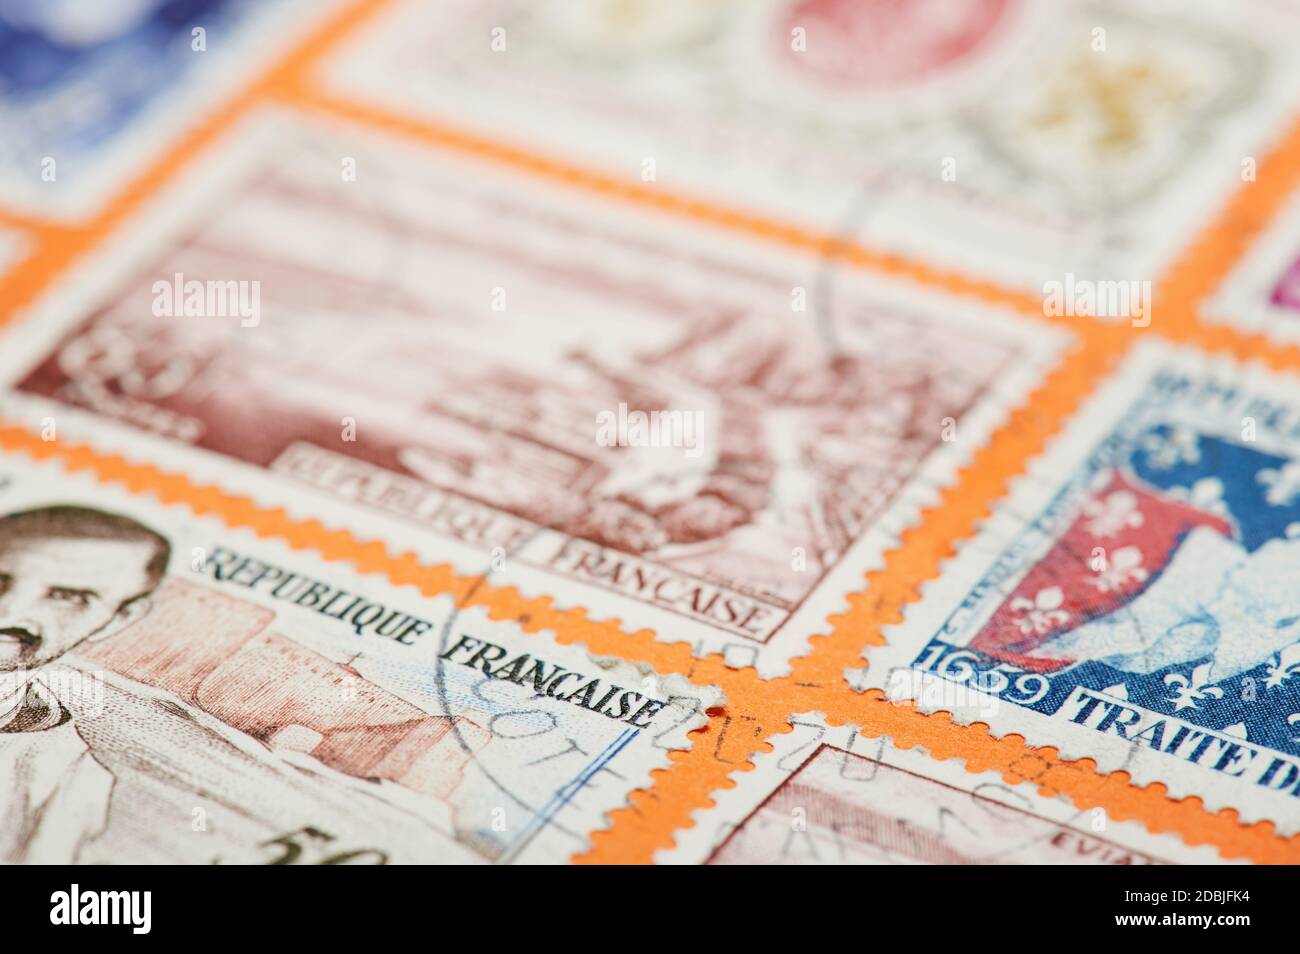 New york, USA - November 17, 2020: Put stamp on international mail from Europe. France stamp on courier package close up view Stock Photo